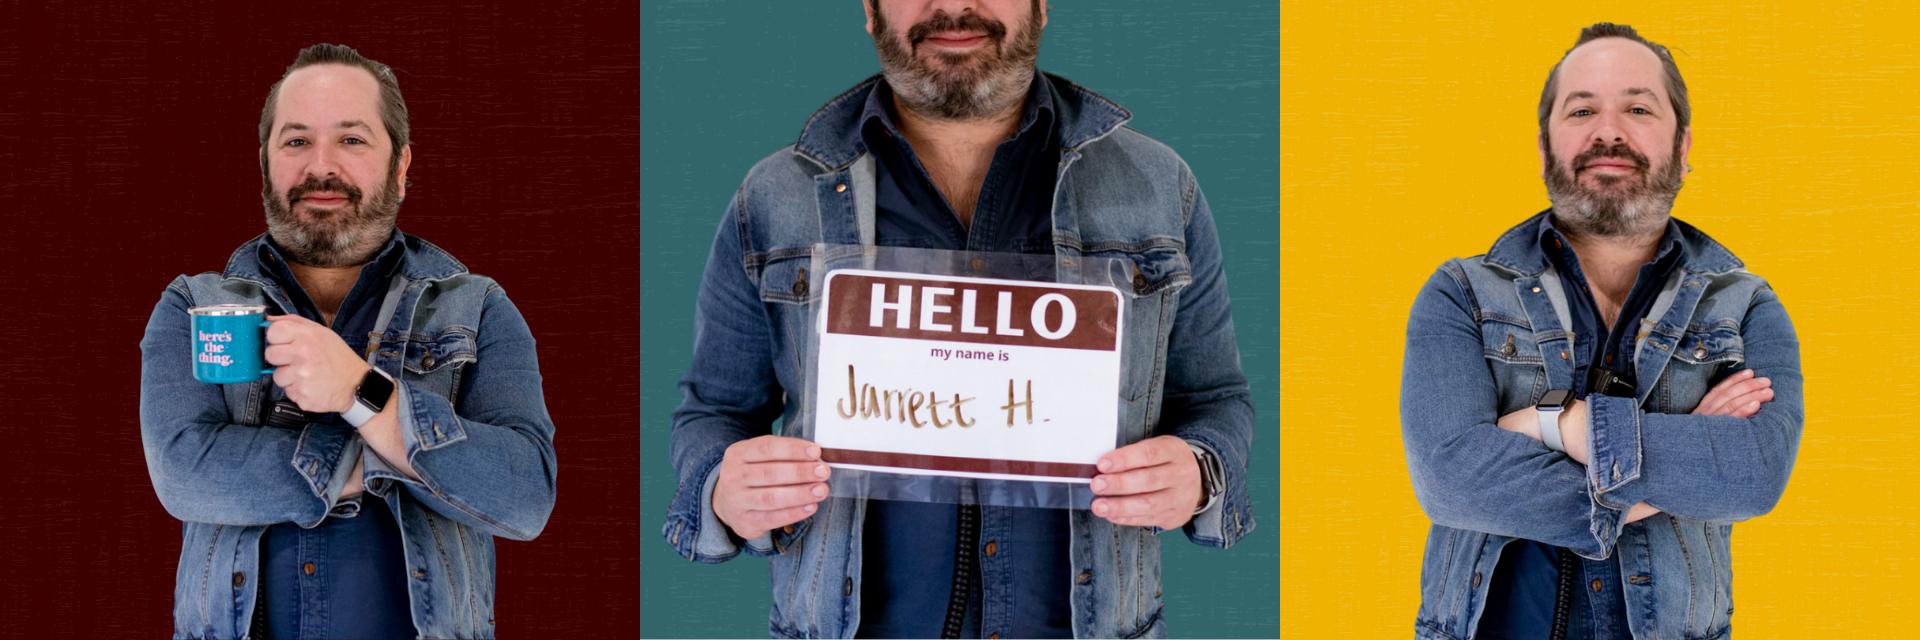 Collage of three photos of Jarrett, one holding his mug, one holding a sign with his name on it, and one with her looking at the camera and smiling.